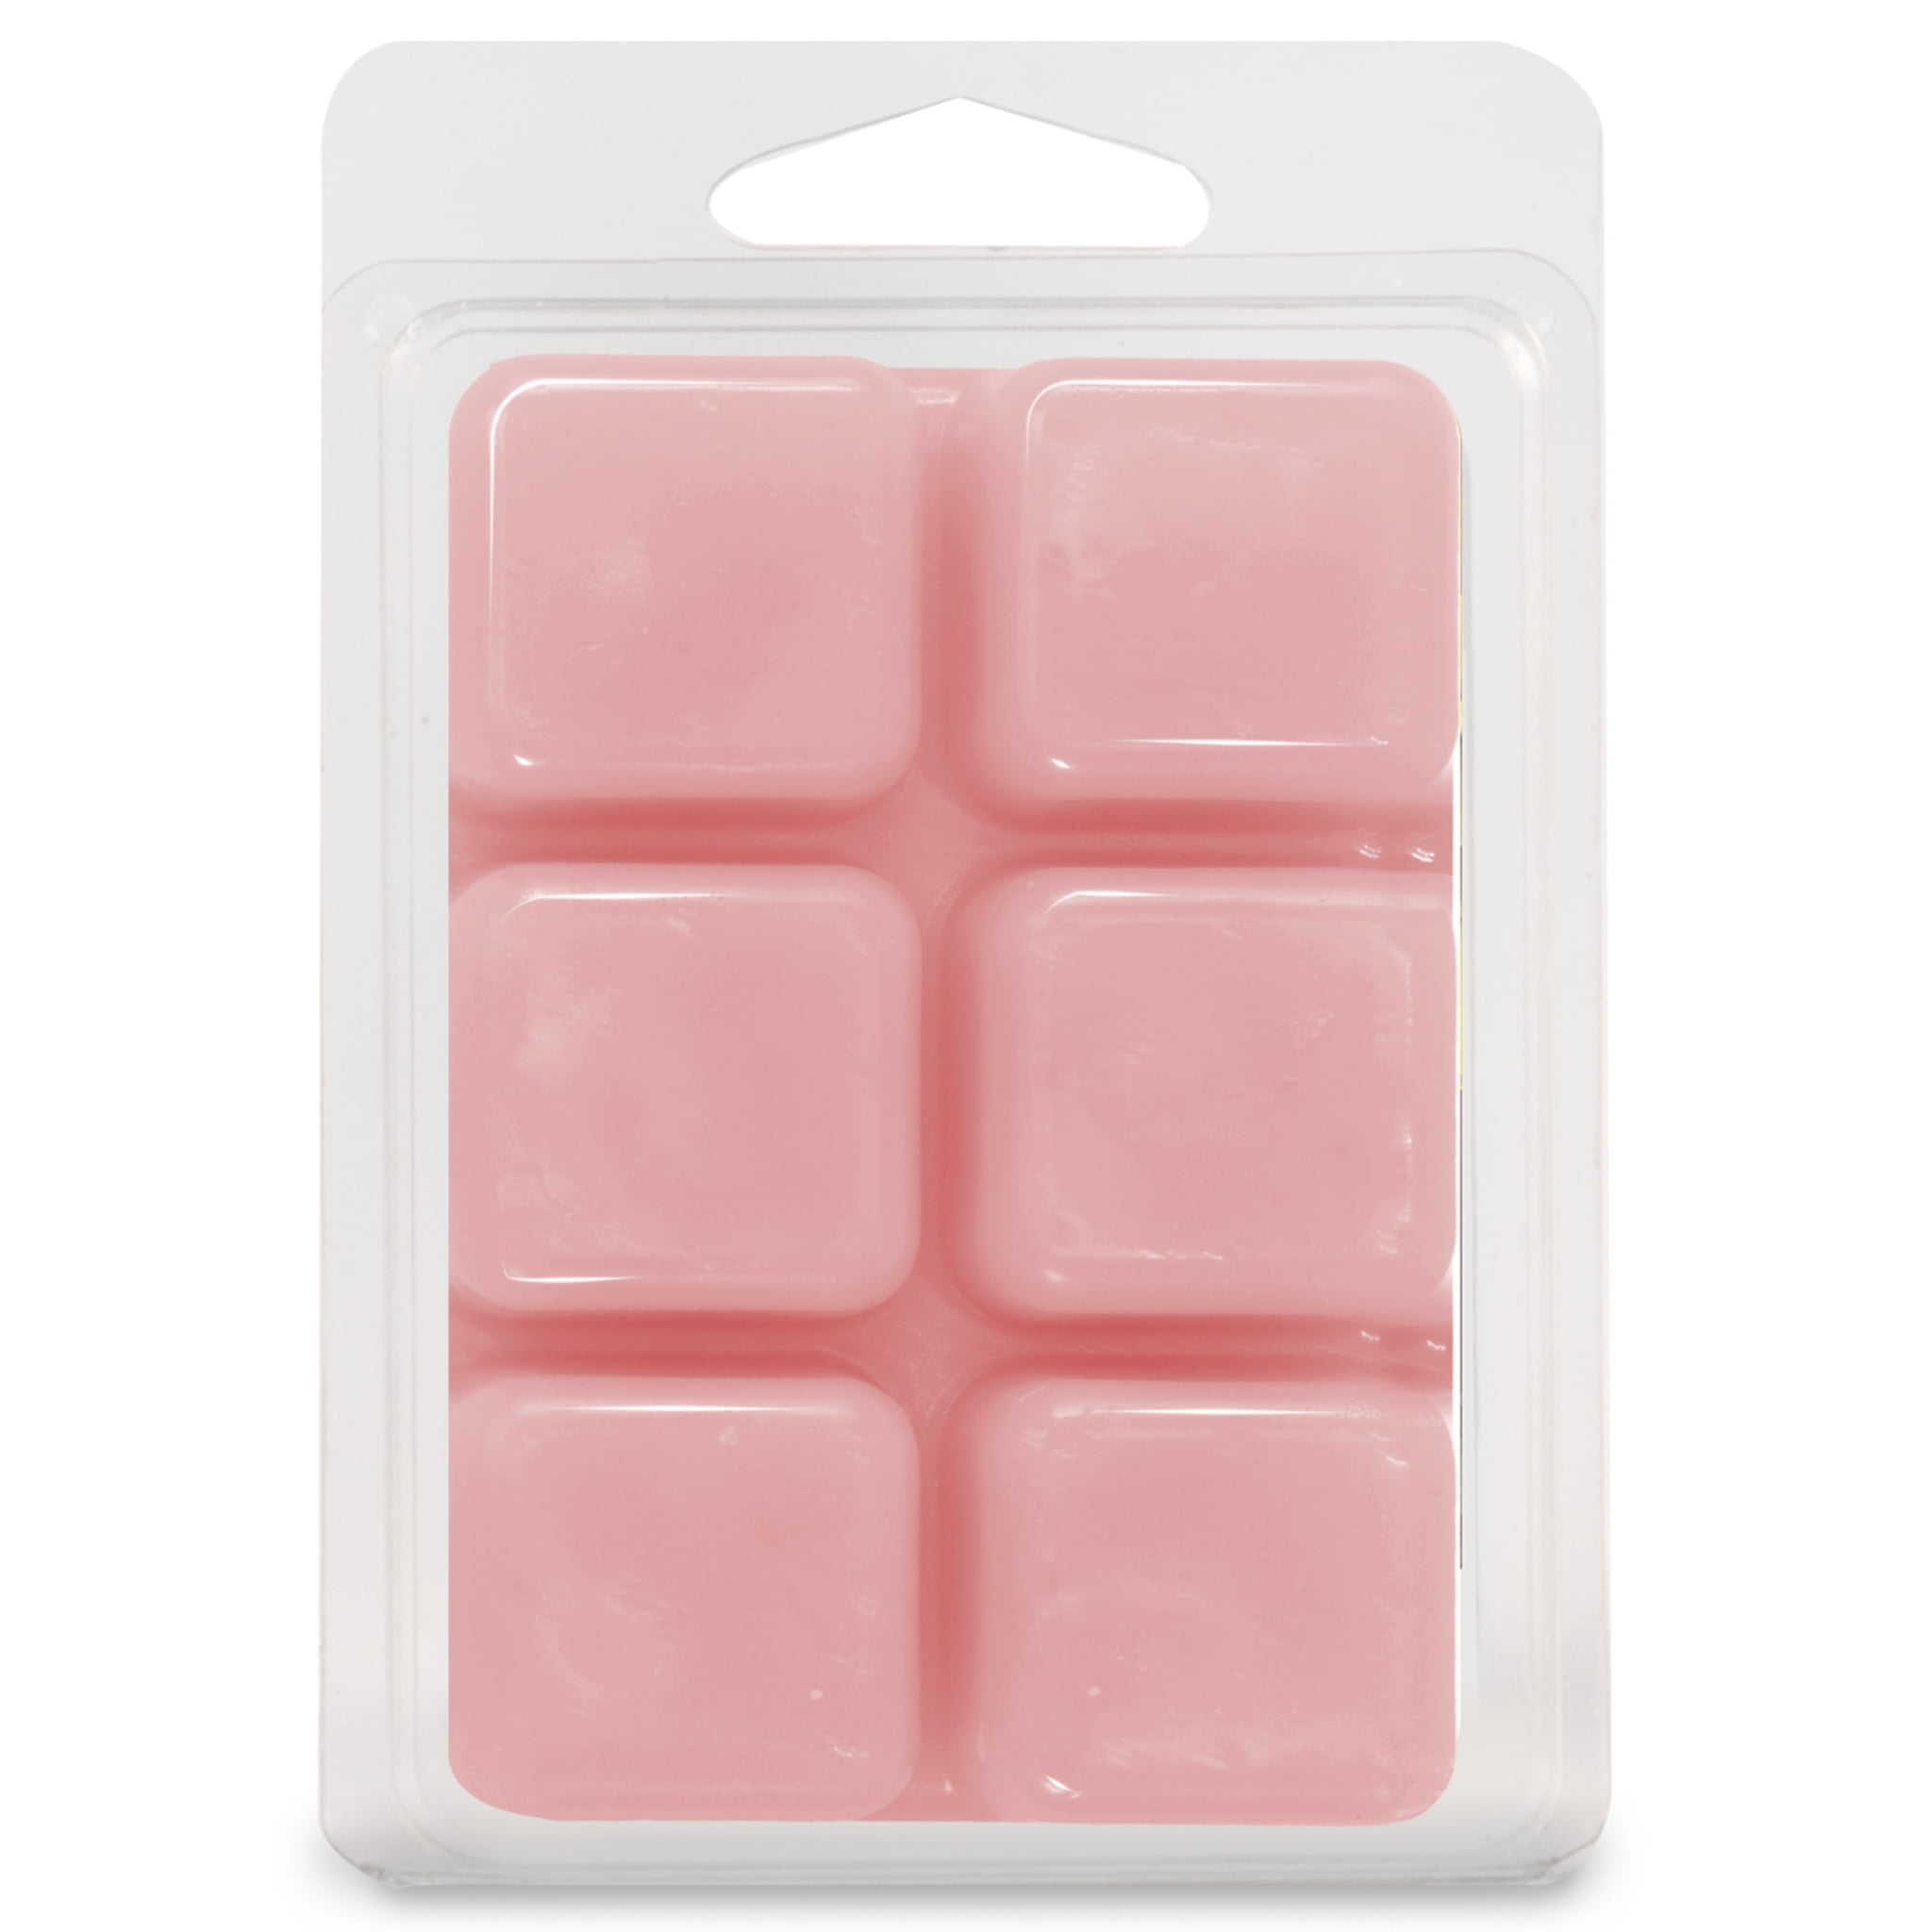 Kermode Fruity Wax Melts - 6 Amazing Scents For Wax Melter - 36 Scented Wax  Melts Wax Cubes - Soy Wax Blend Non Toxic - 15 Oz